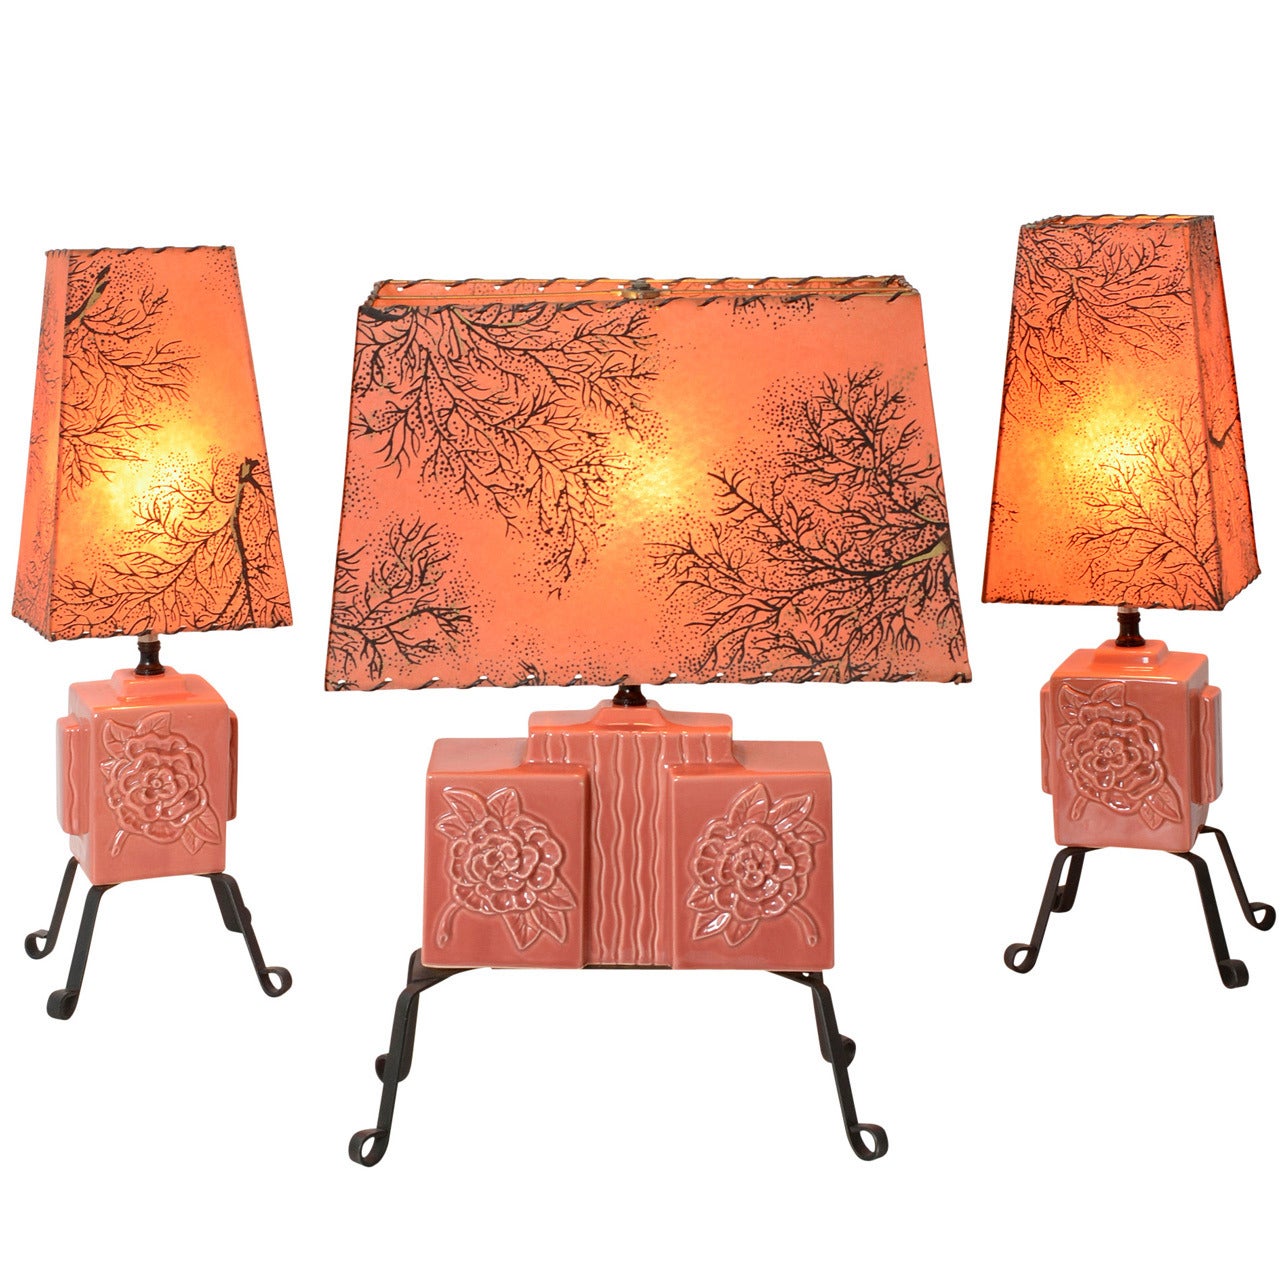 Trio of Sweet and Modern Rose-Colored Table Lamps, circa 1955